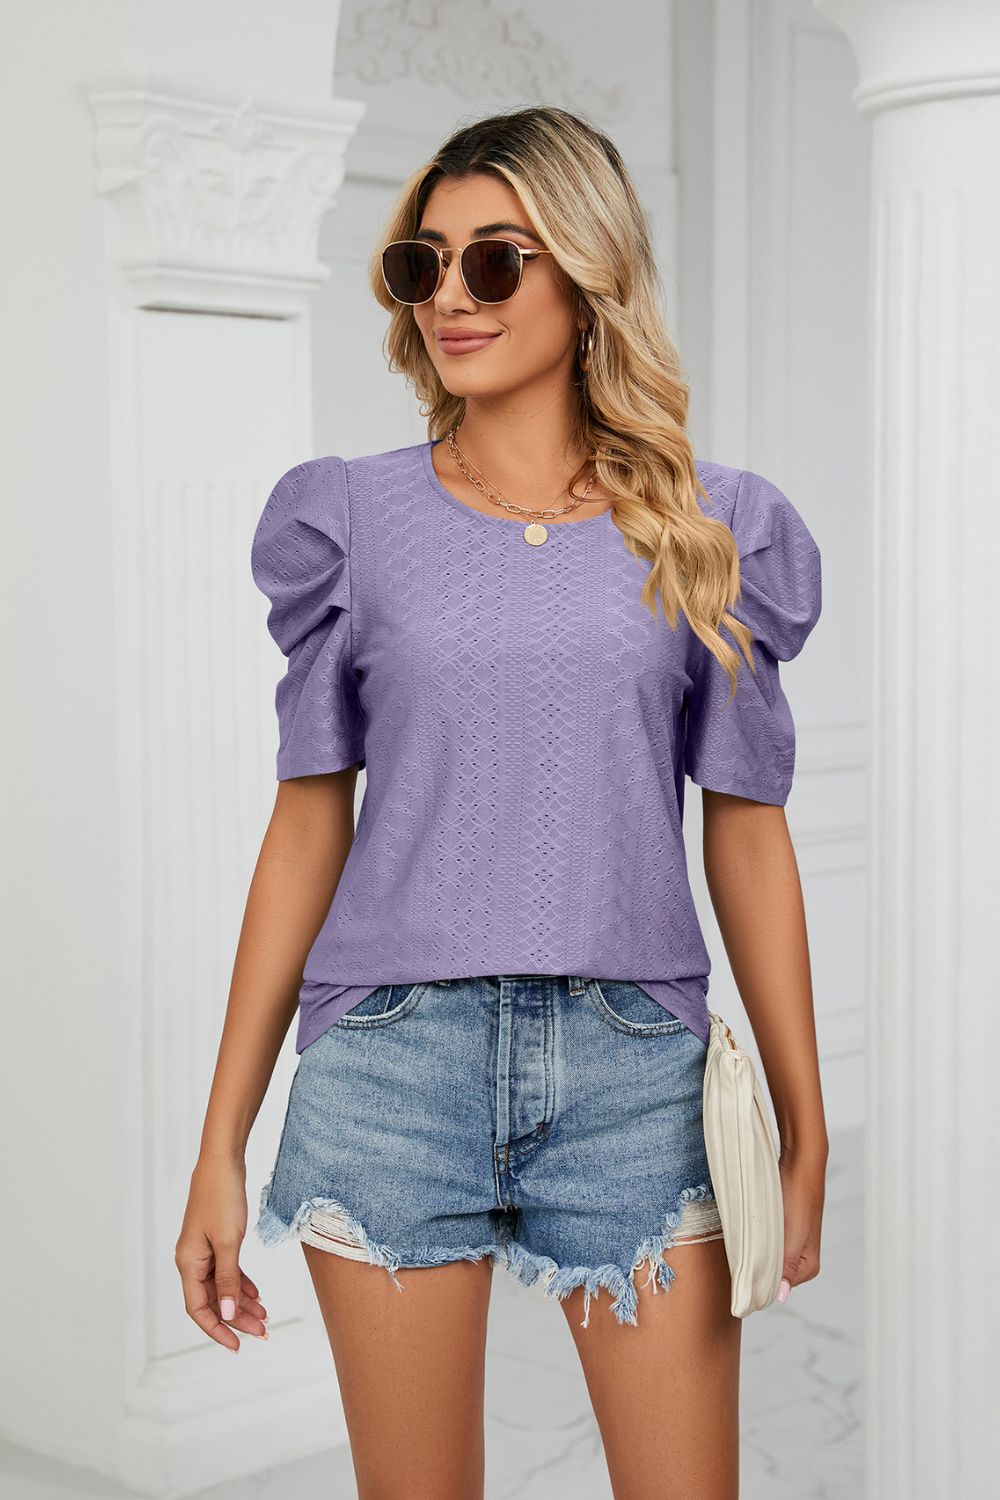 Why Not Me Eyelet Puff Sleeve Top - purple short sleeve top with puff sleeves and round neck #Firefly Lane Boutique1